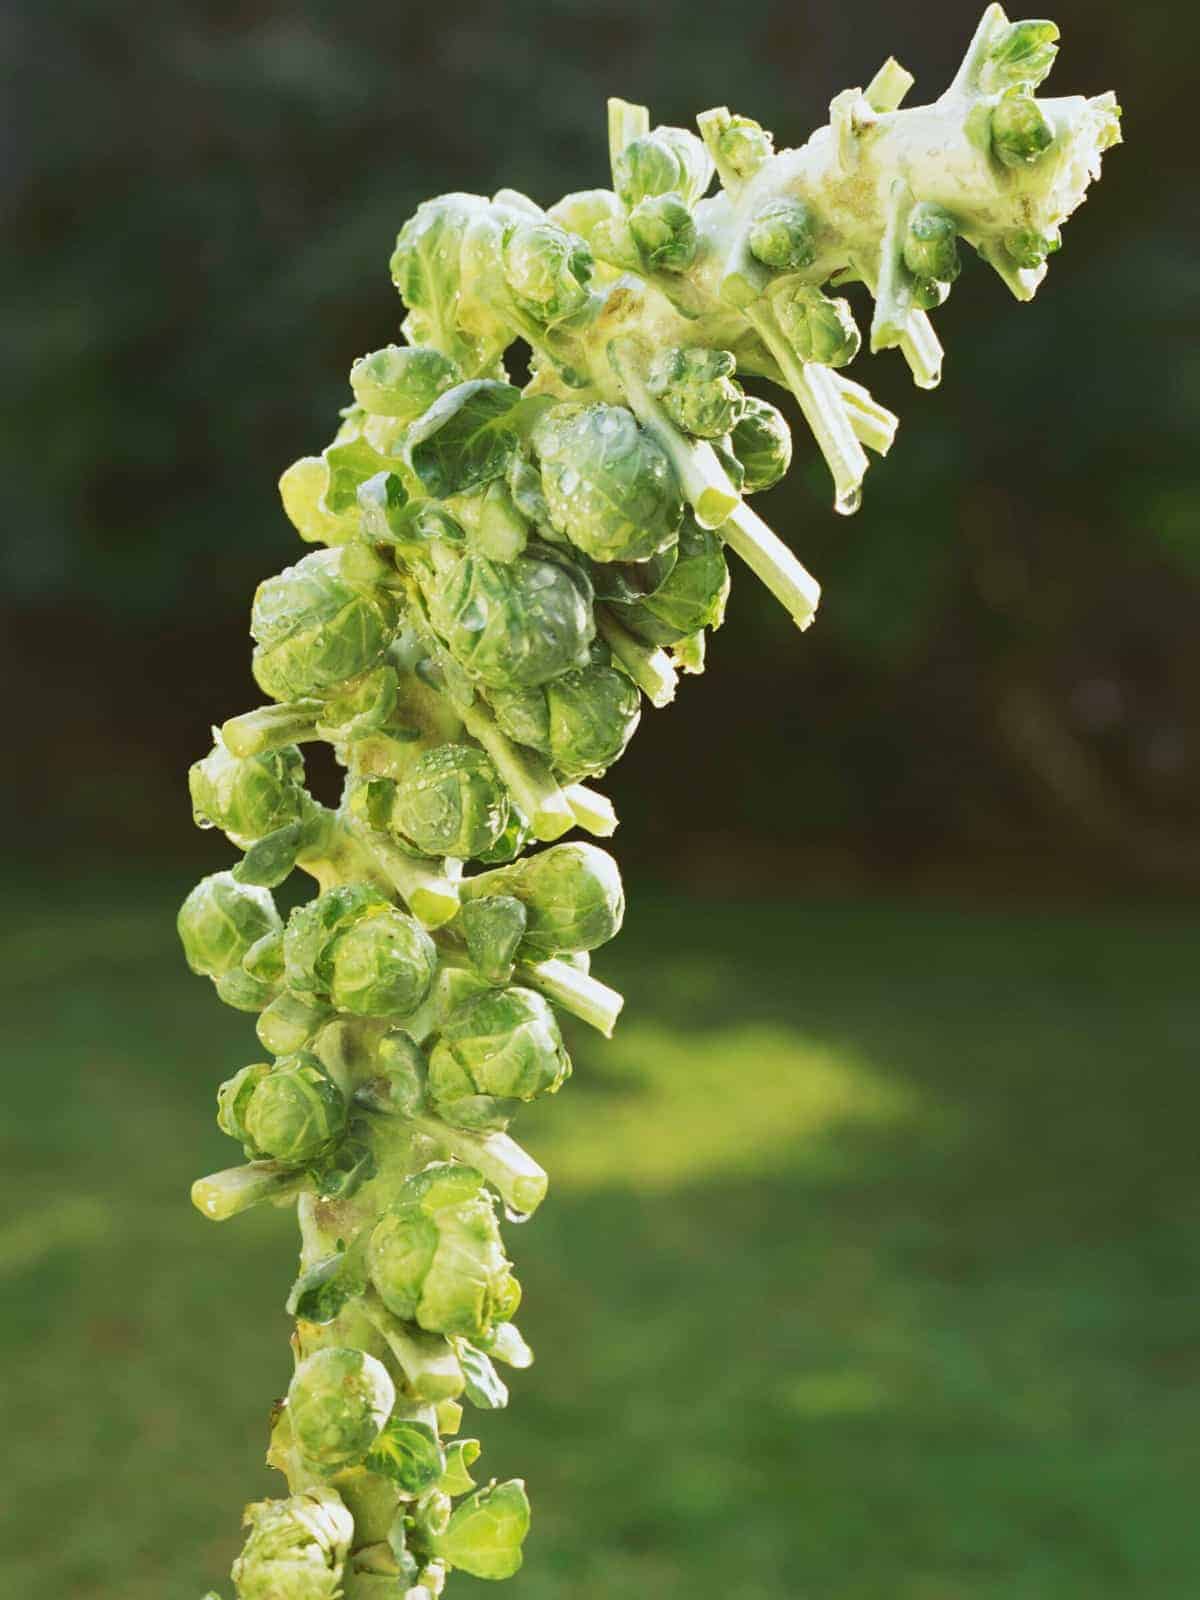 Raw Brussels sprouts on stalk